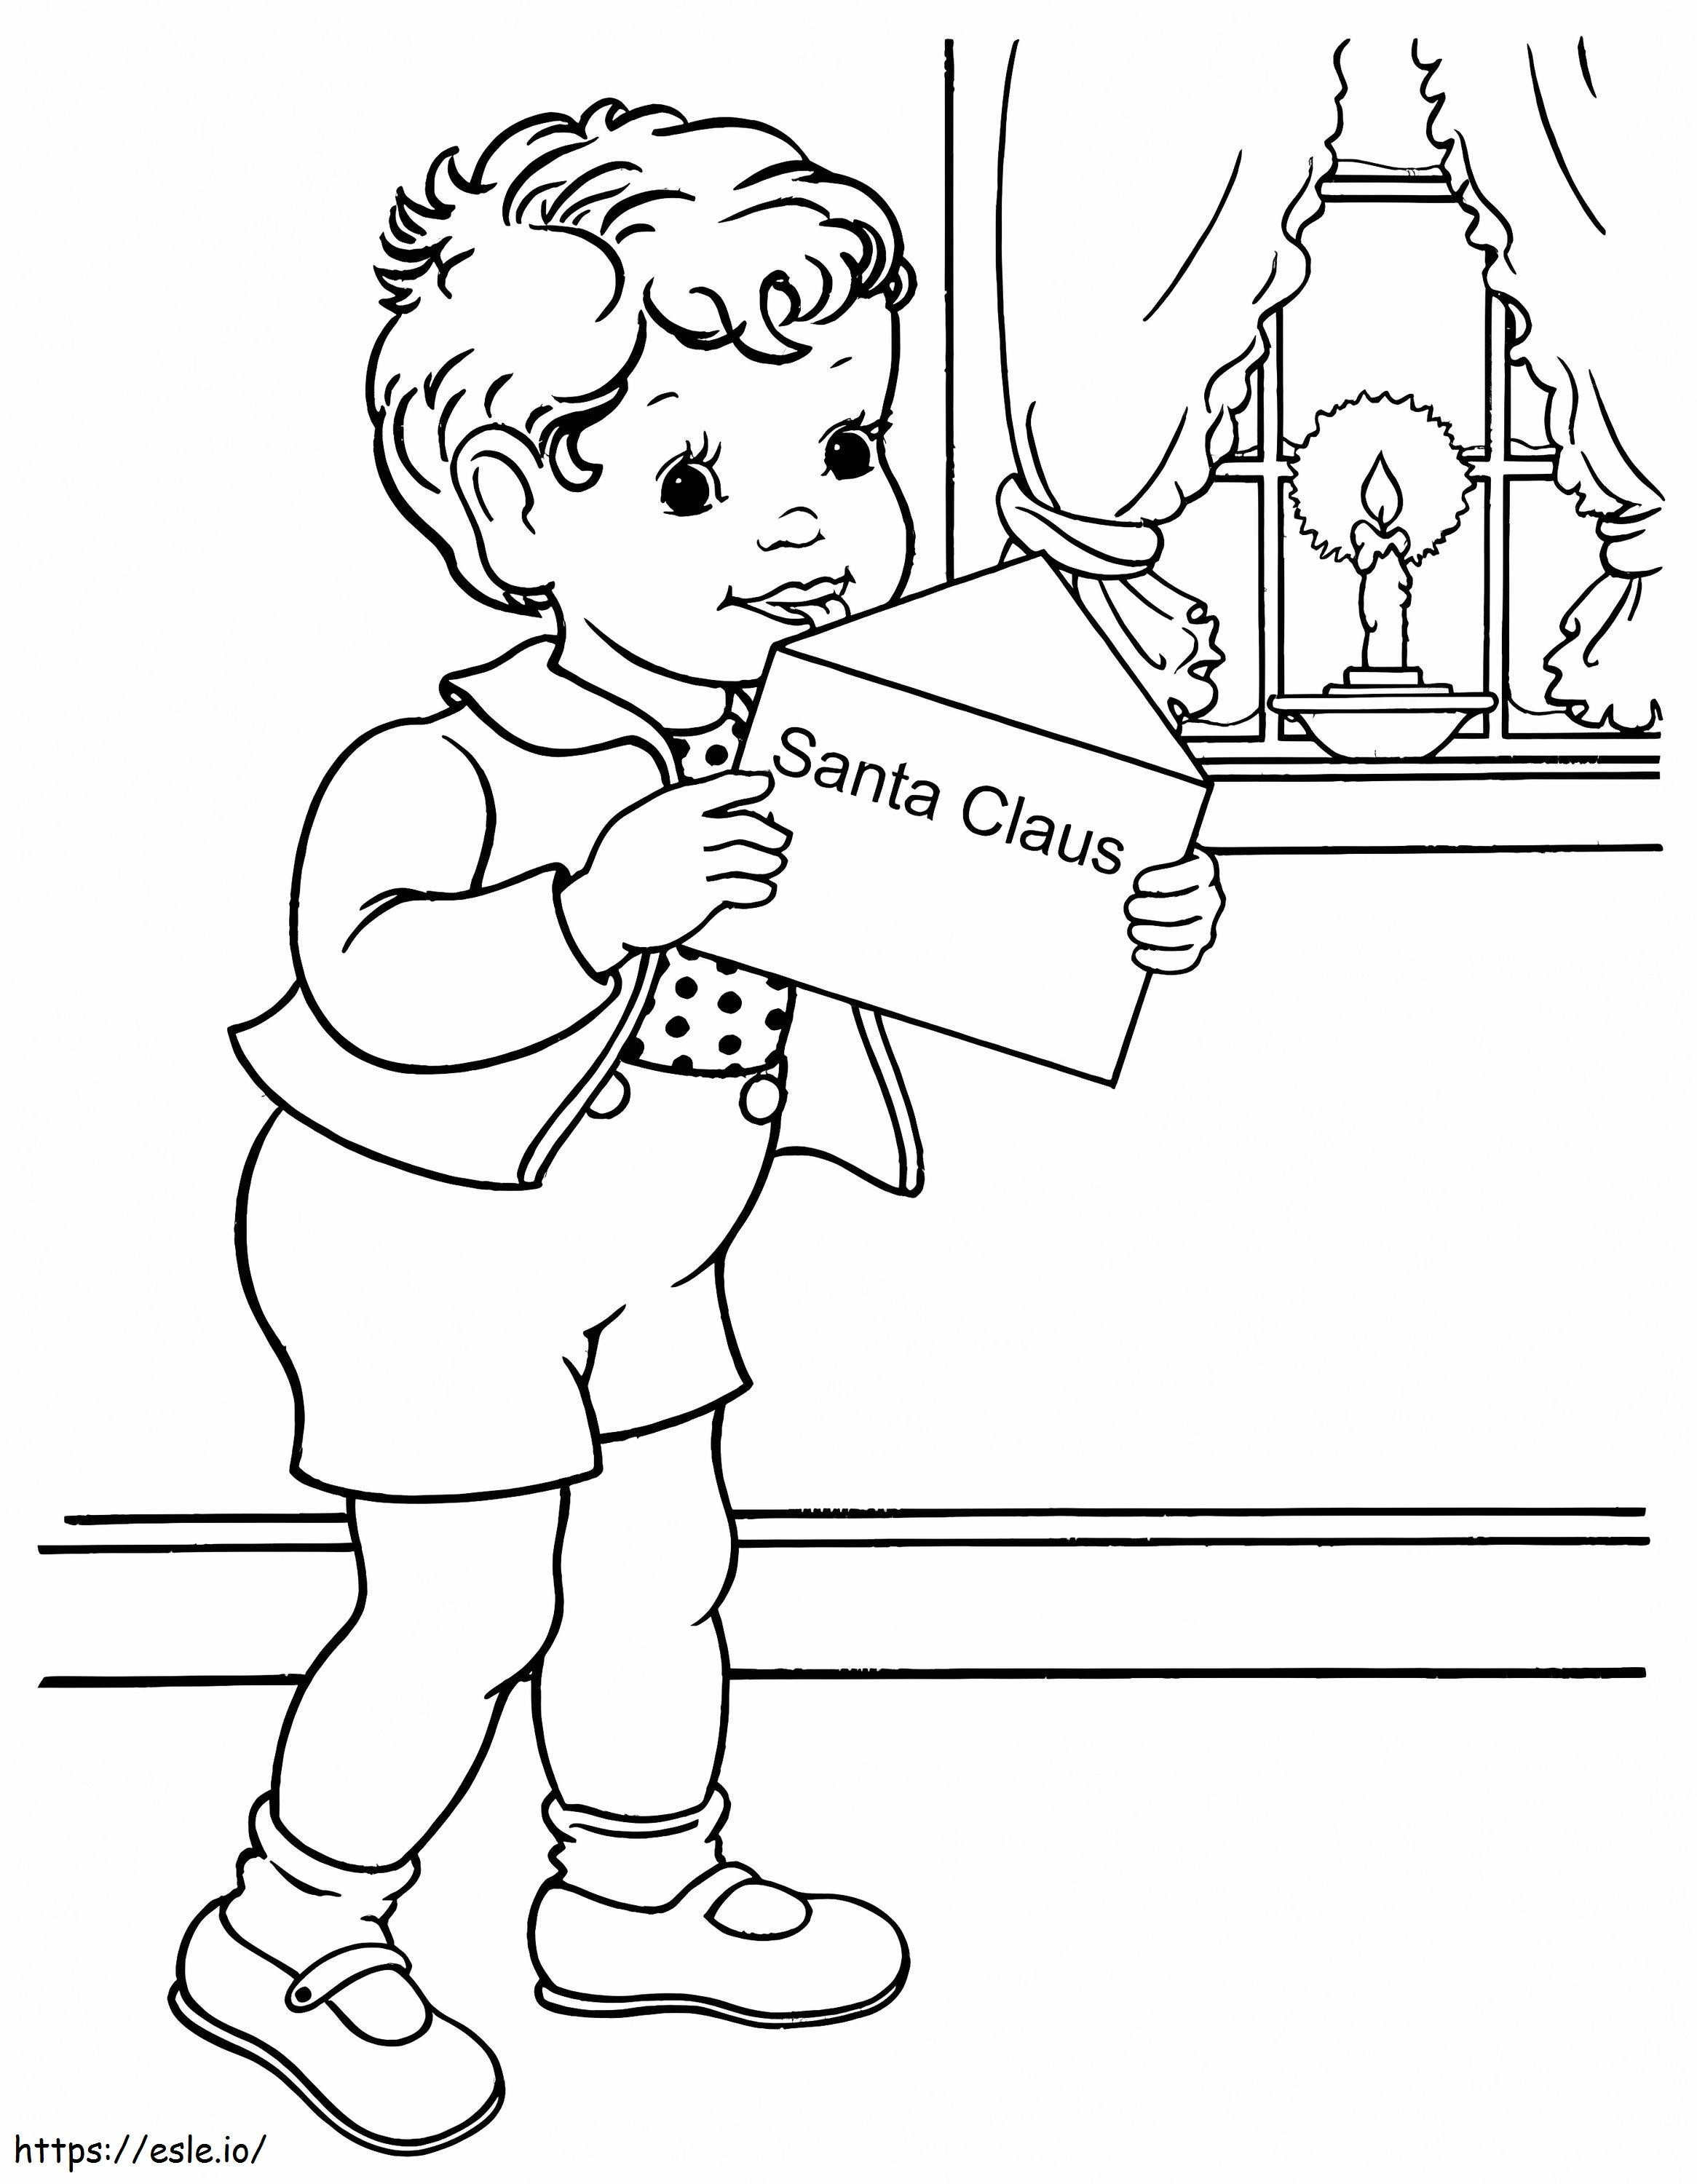 1545187626_Christmas 05 coloring page